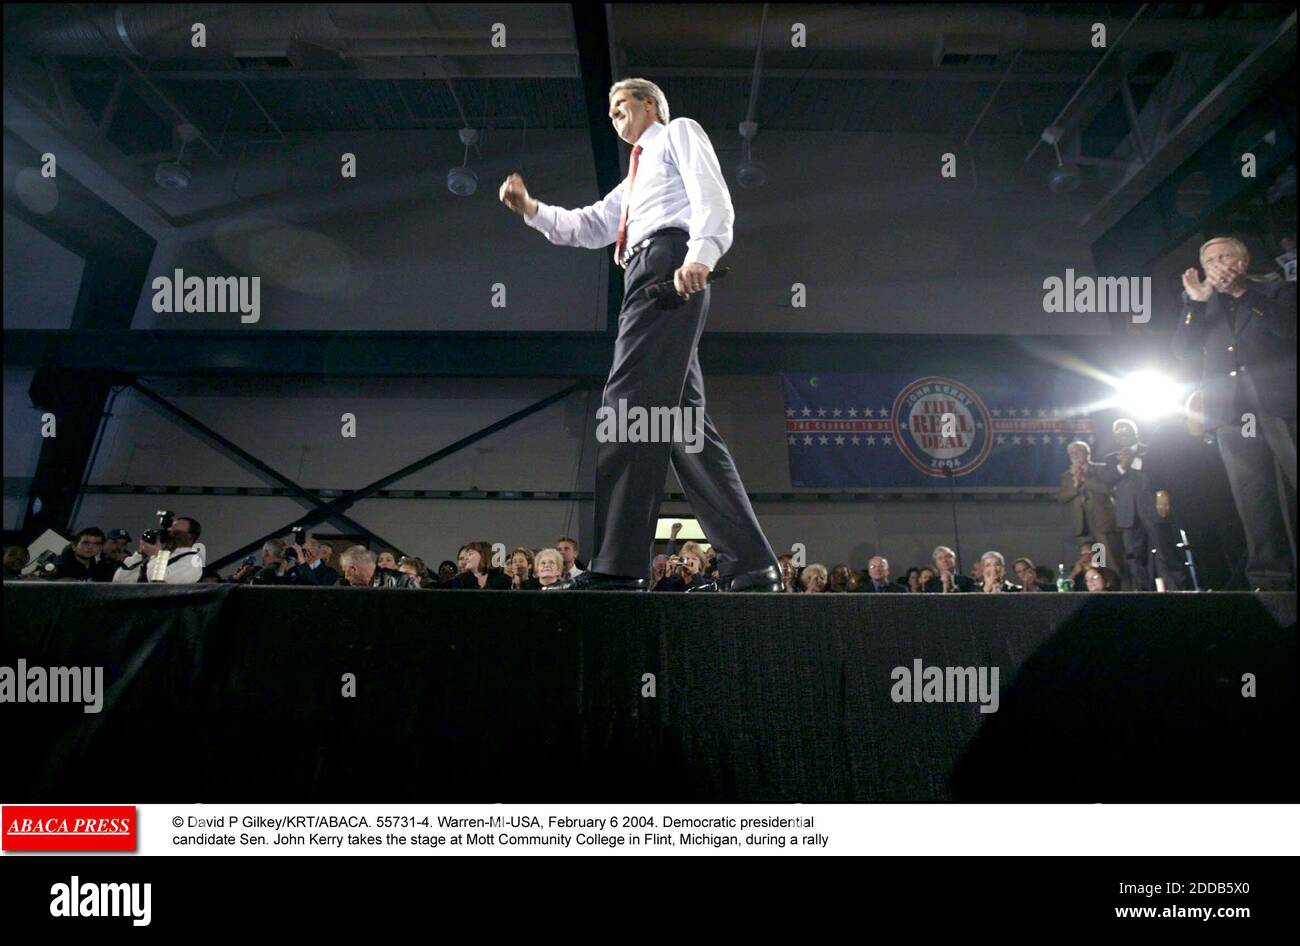 NO FILM, NO VIDEO, NO TV, NO DOCUMENTARY - © David P Gilkey/KRT/ABACA. 55731-4. Warren-MI-USA, February 6 2004. Democratic presidential candidate Sen. John Kerry takes the stage at Mott Community College in Flint, Michigan, during a rally Stock Photo